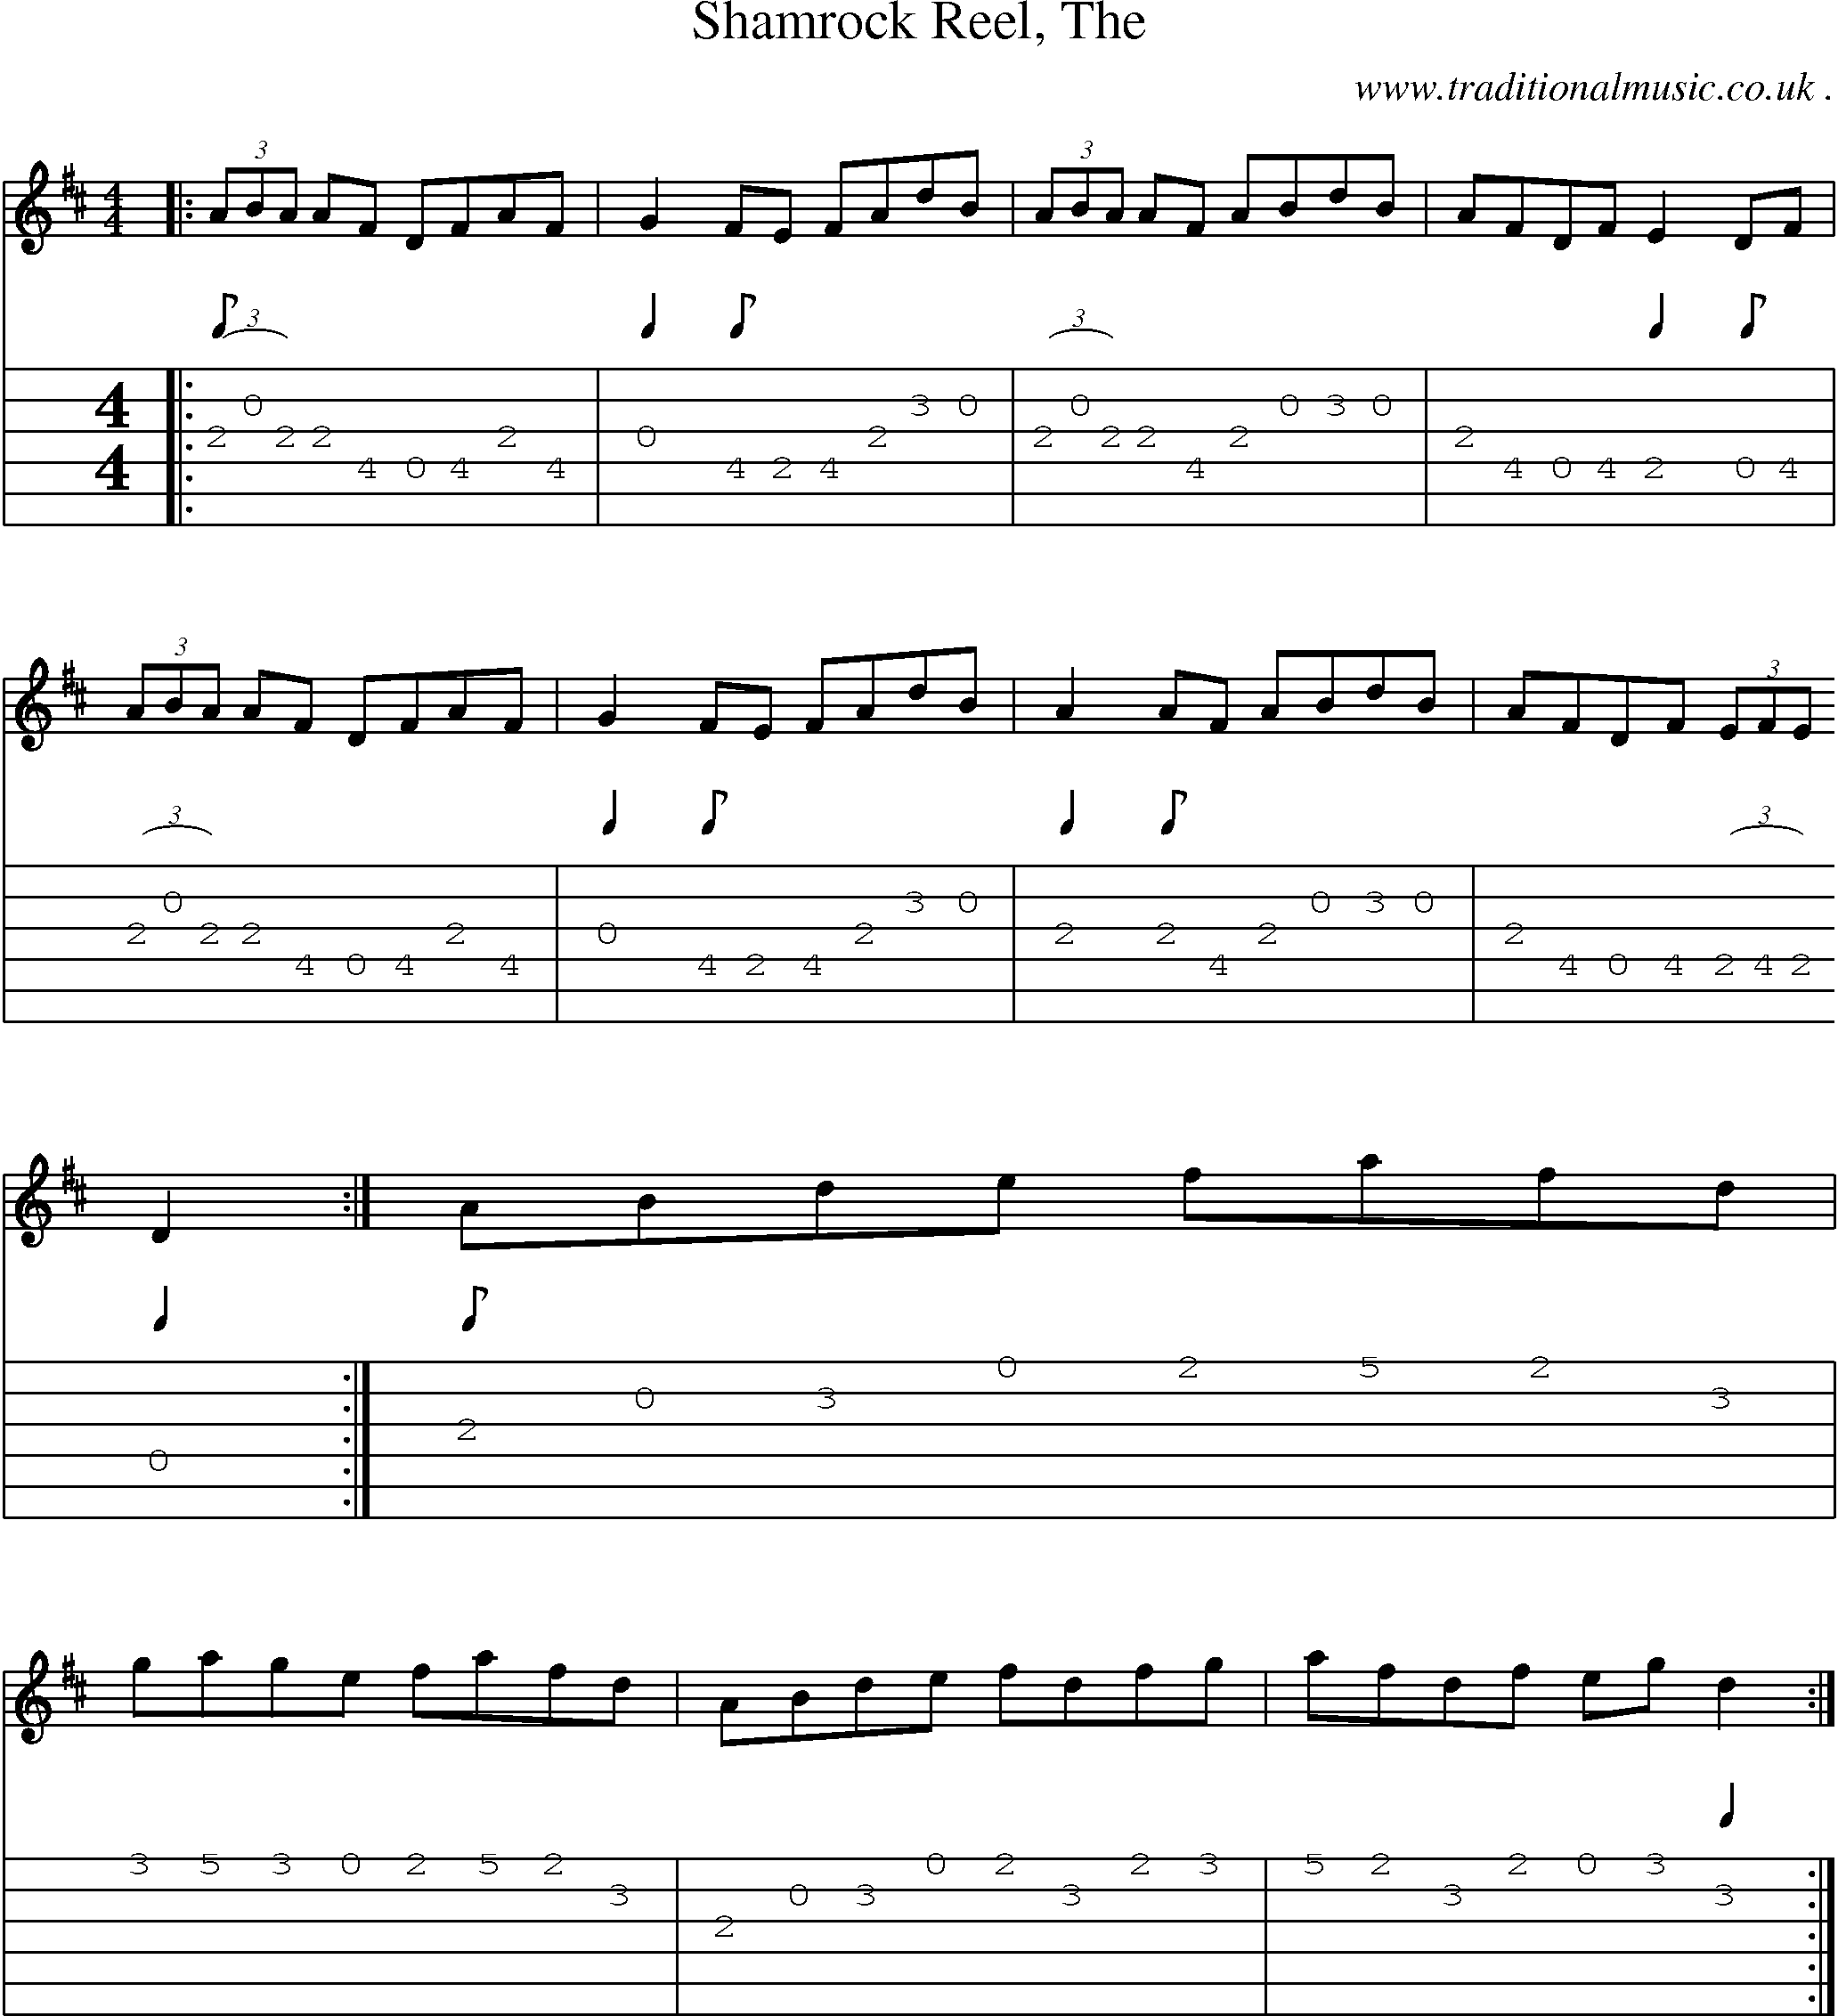 Music Score and Guitar Tabs for Shamrock Reel The